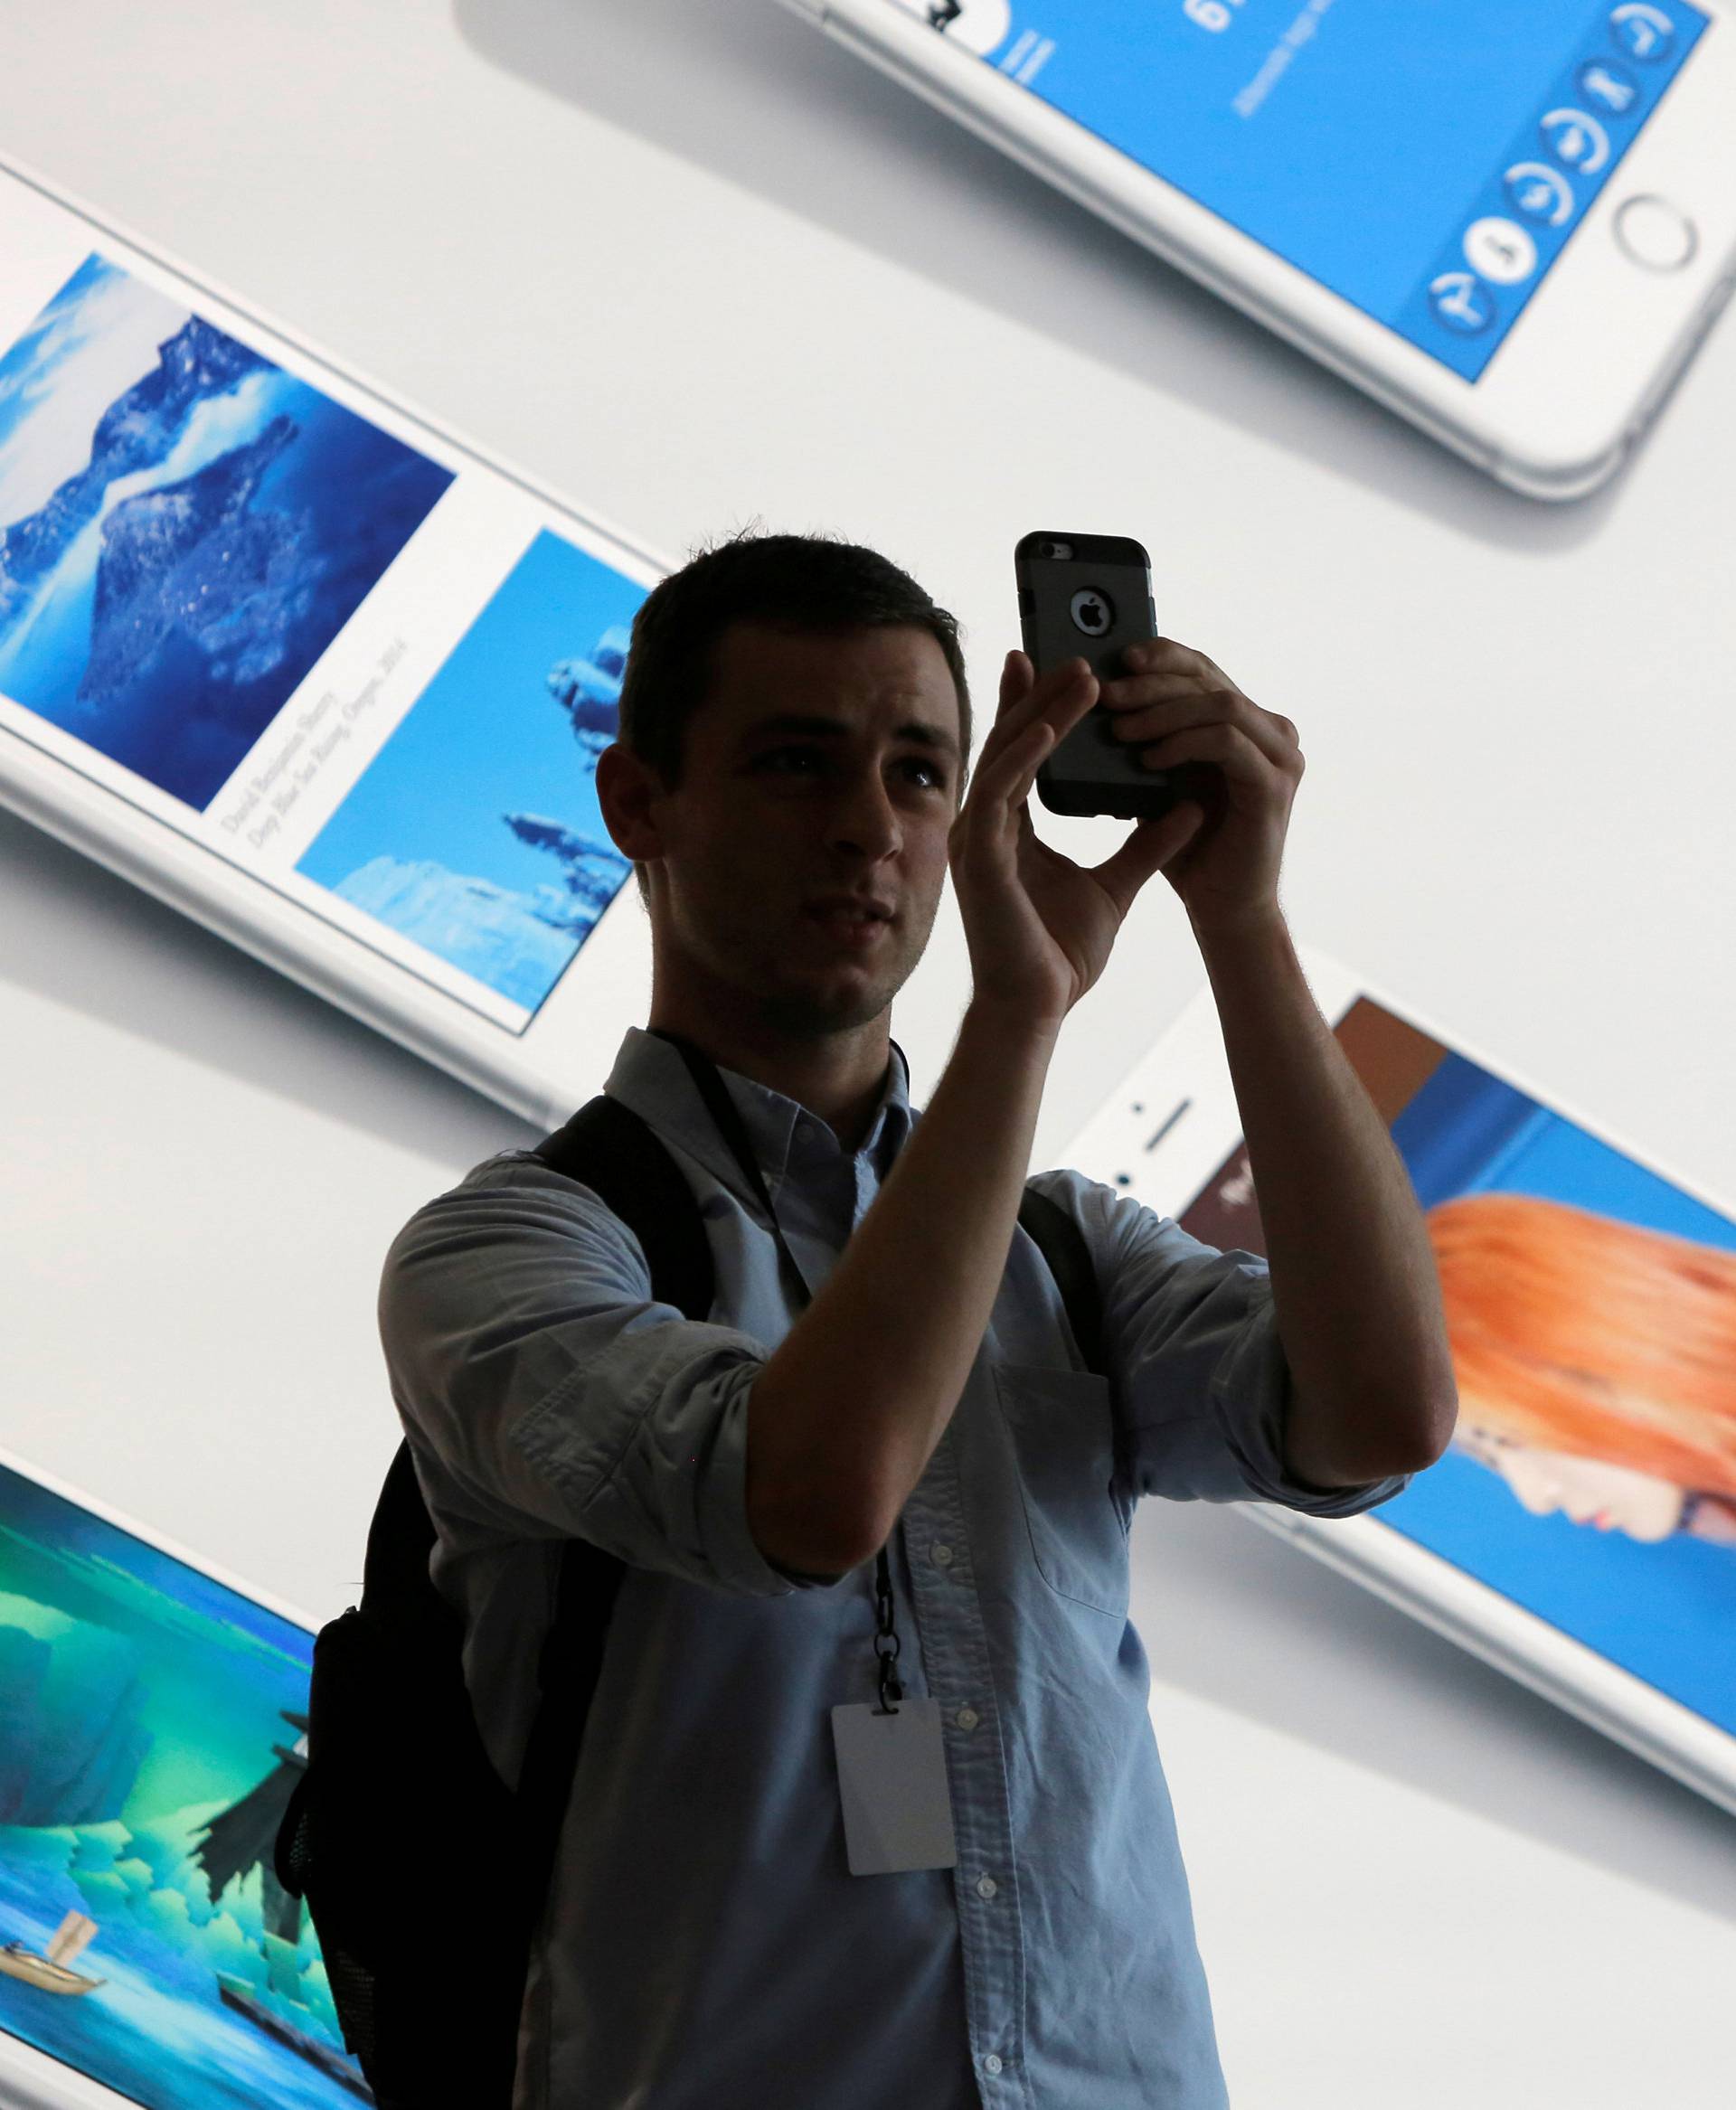 FILE PHOTO: A man uses his iPhone during a preview event at the new Apple Store Williamsburg in Brooklyn, New York